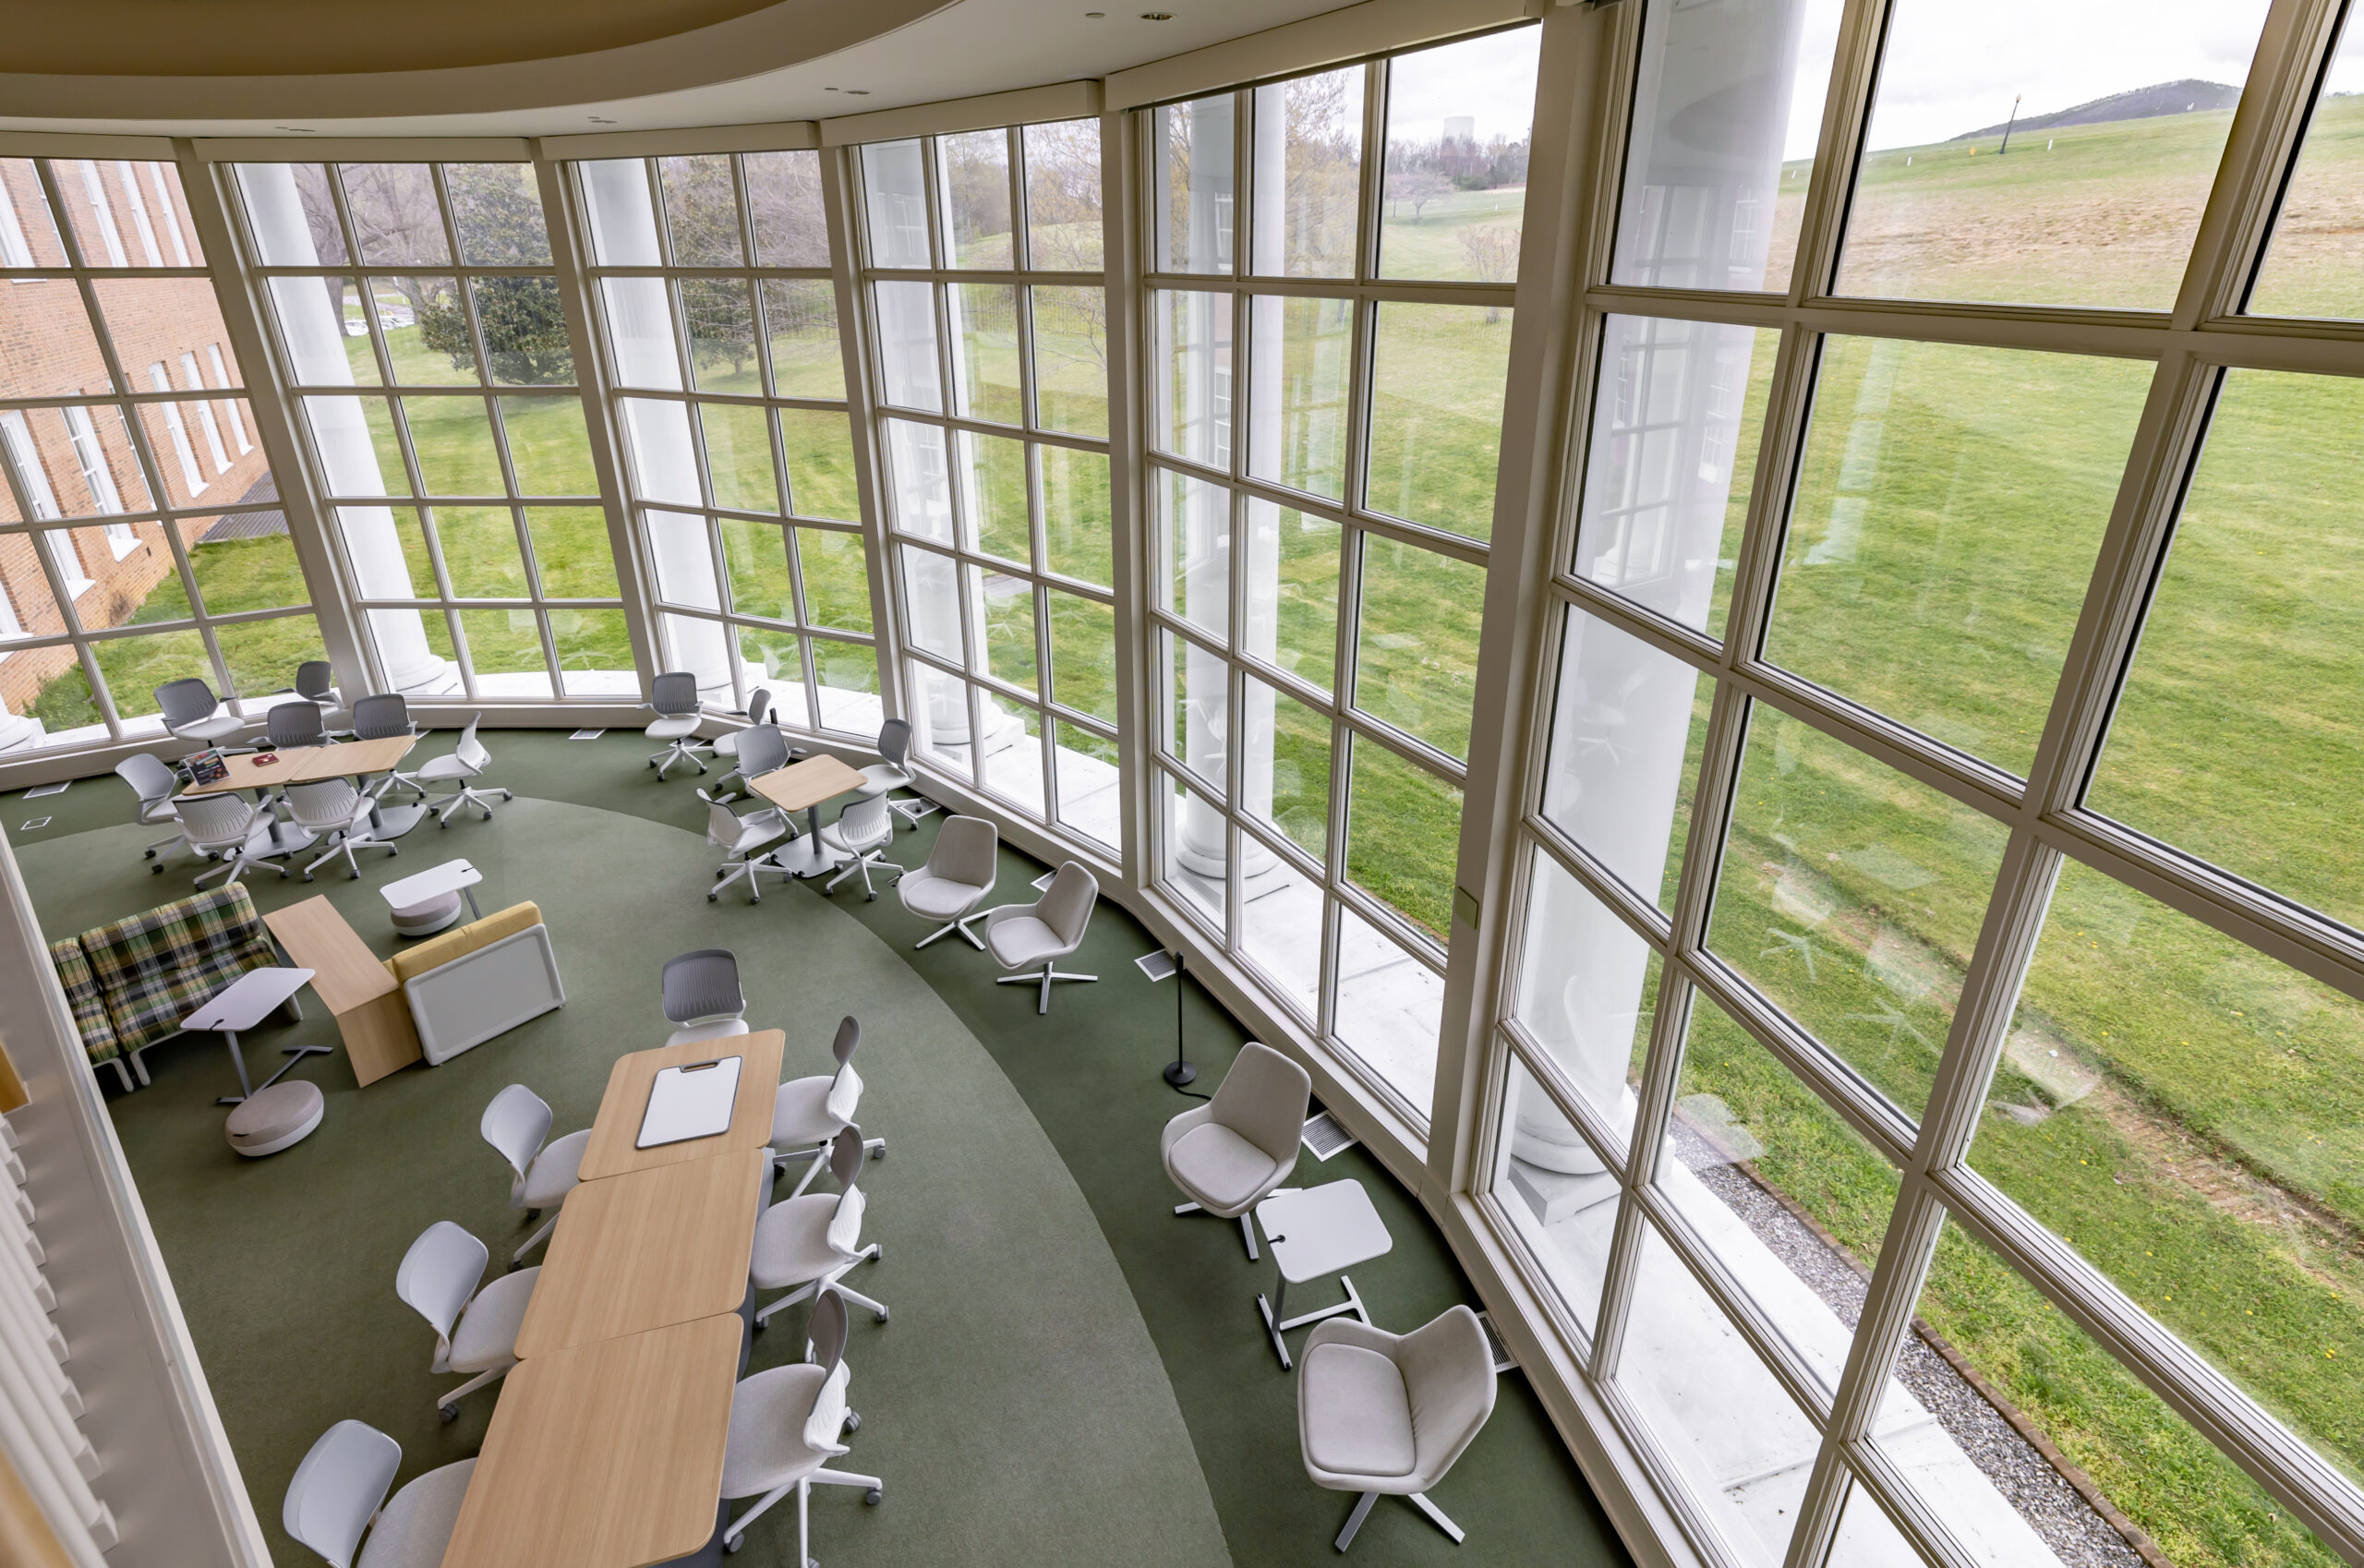 Hollins University Library reading room with windows and tables/chairs